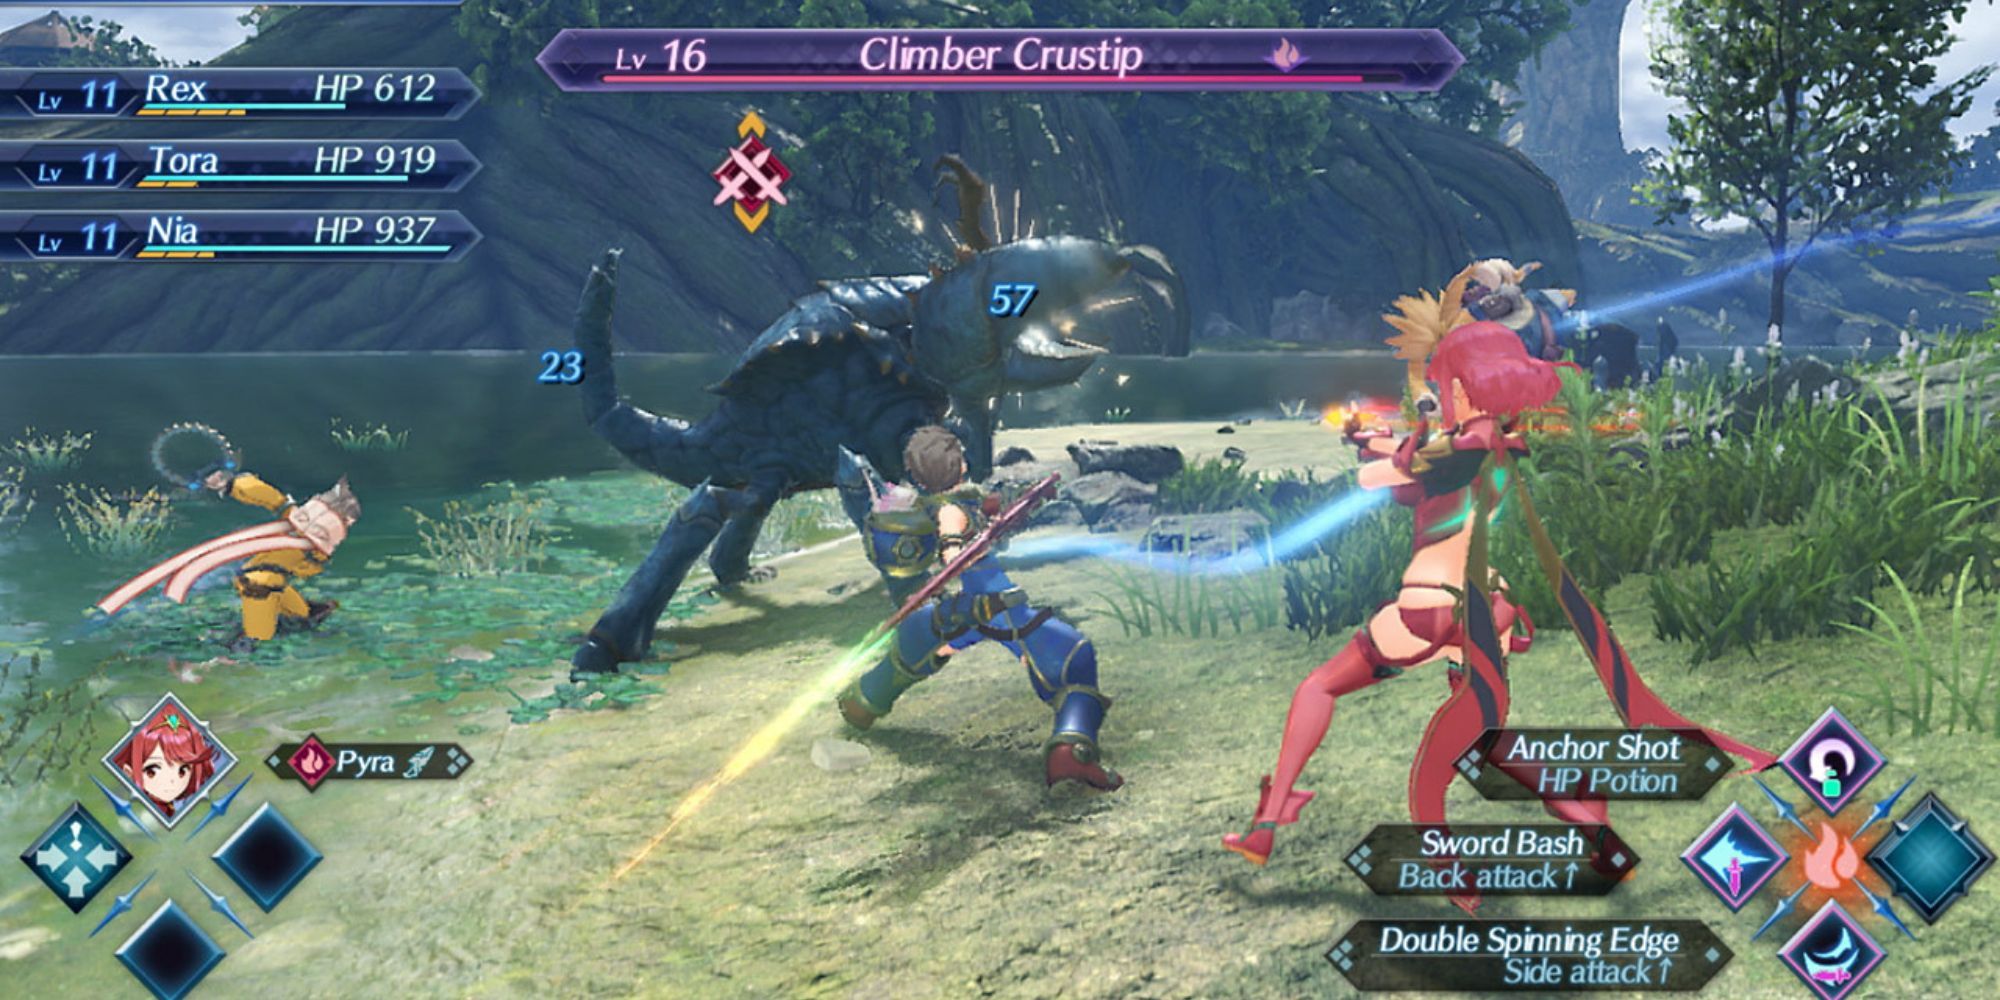 A player attacking a Climber Crustip in Xenoblade Chronicles on Switch